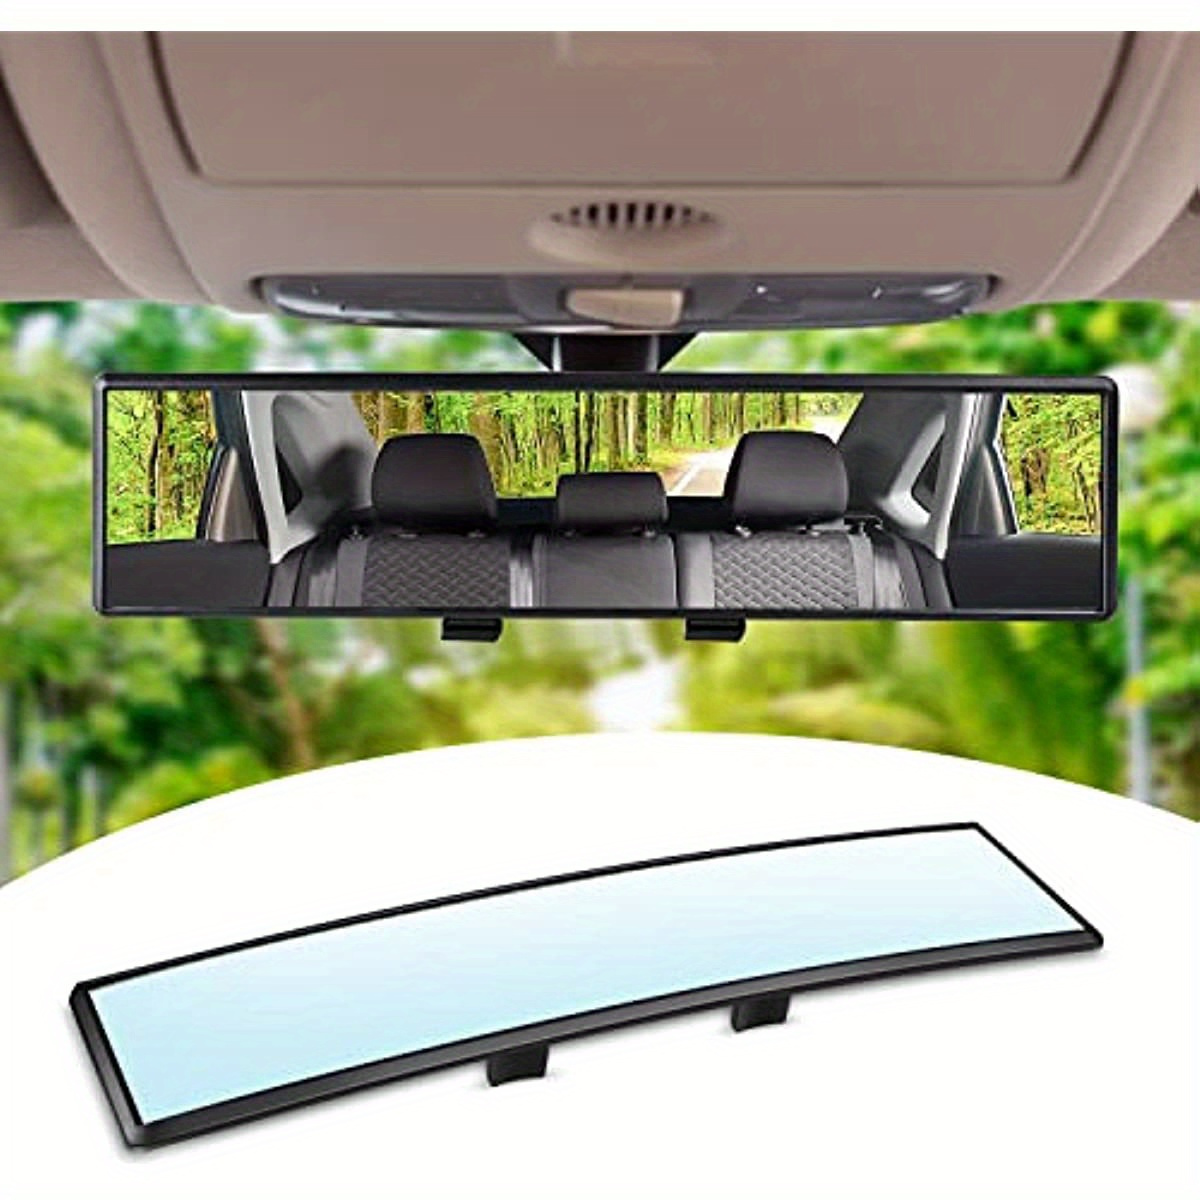 

Panoramic Rearview Mirror - 9.4", 10.6", 11.8" - Clip-on Wide Angle Convex Lens - Front Part Location - Universal Fit For Cars, Suvs, Trucks - Rectangle Shape, Blind Spot Minimizing Interior Accessory